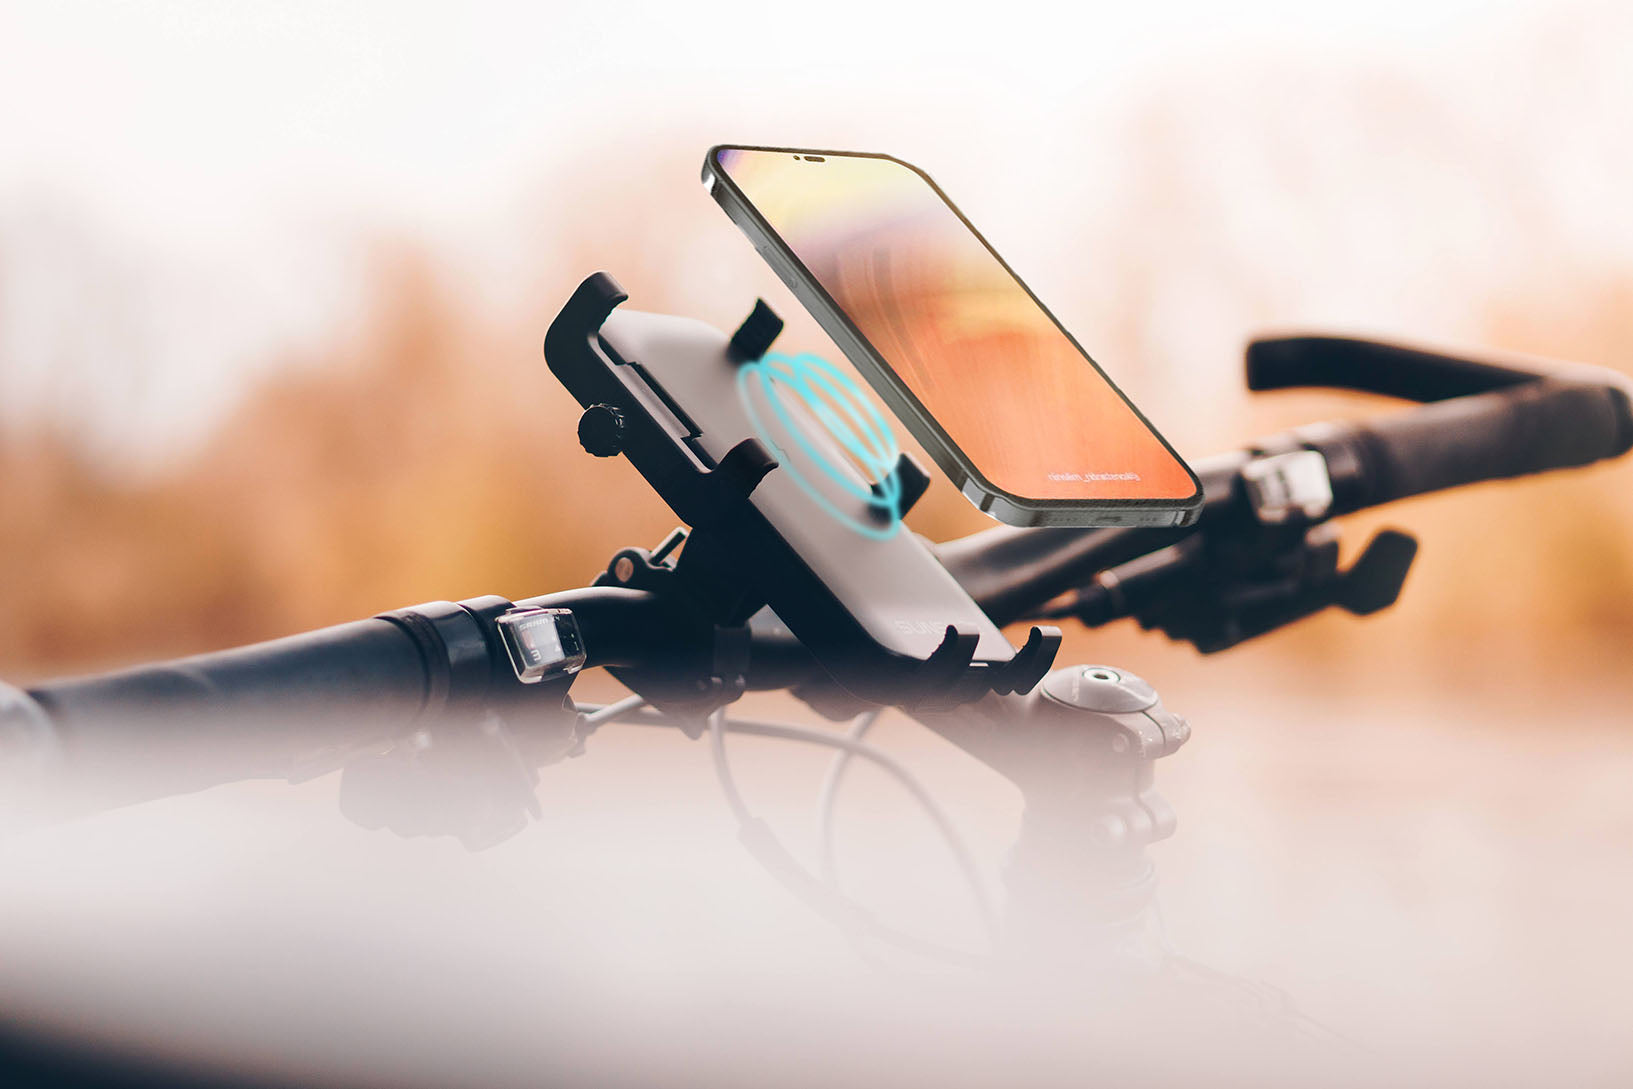 phone holder on a bike with a flying phone on top of it, wireless charging